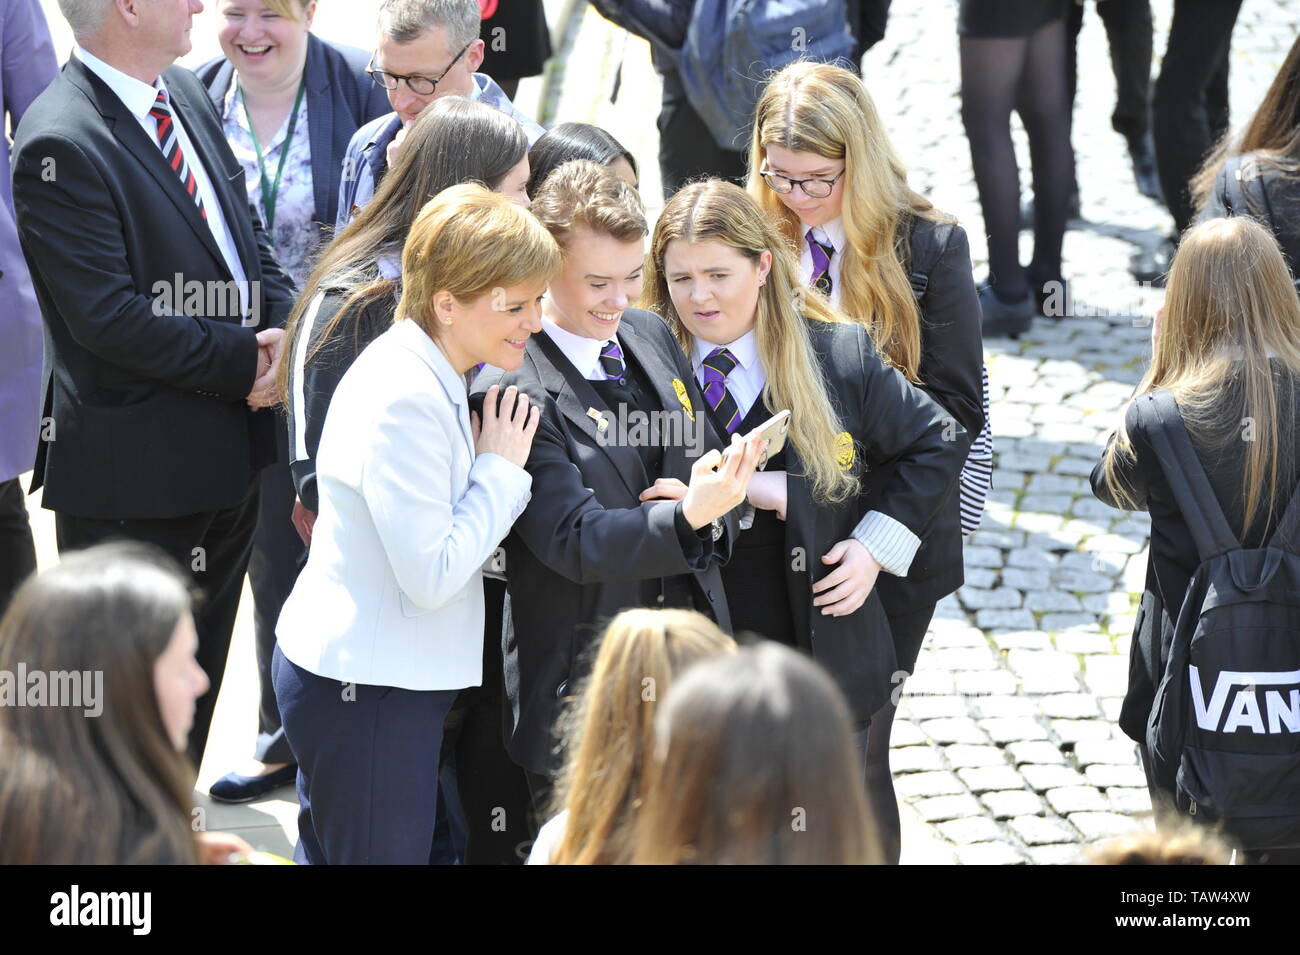 Edinburgh, UK. 28th May, 2019. SNP Leader Nicola Sturgeon welcomes the three newly elected SNP MEPs - Alyn Smith, Christian Allard and Aileen McLeod - following the party's emphatic victory in the European parliament elections. Ms Sturgeon said: “Scotland said no to Brexit in 2016. This emphatic result makes clear, we meant it. “These three first class SNP MEPs will work tirelessly to keep Scotland in Europe, stop Brexit and make Scotland's voice heard at every turn. Credit: Colin Fisher/Alamy Live News Stock Photo